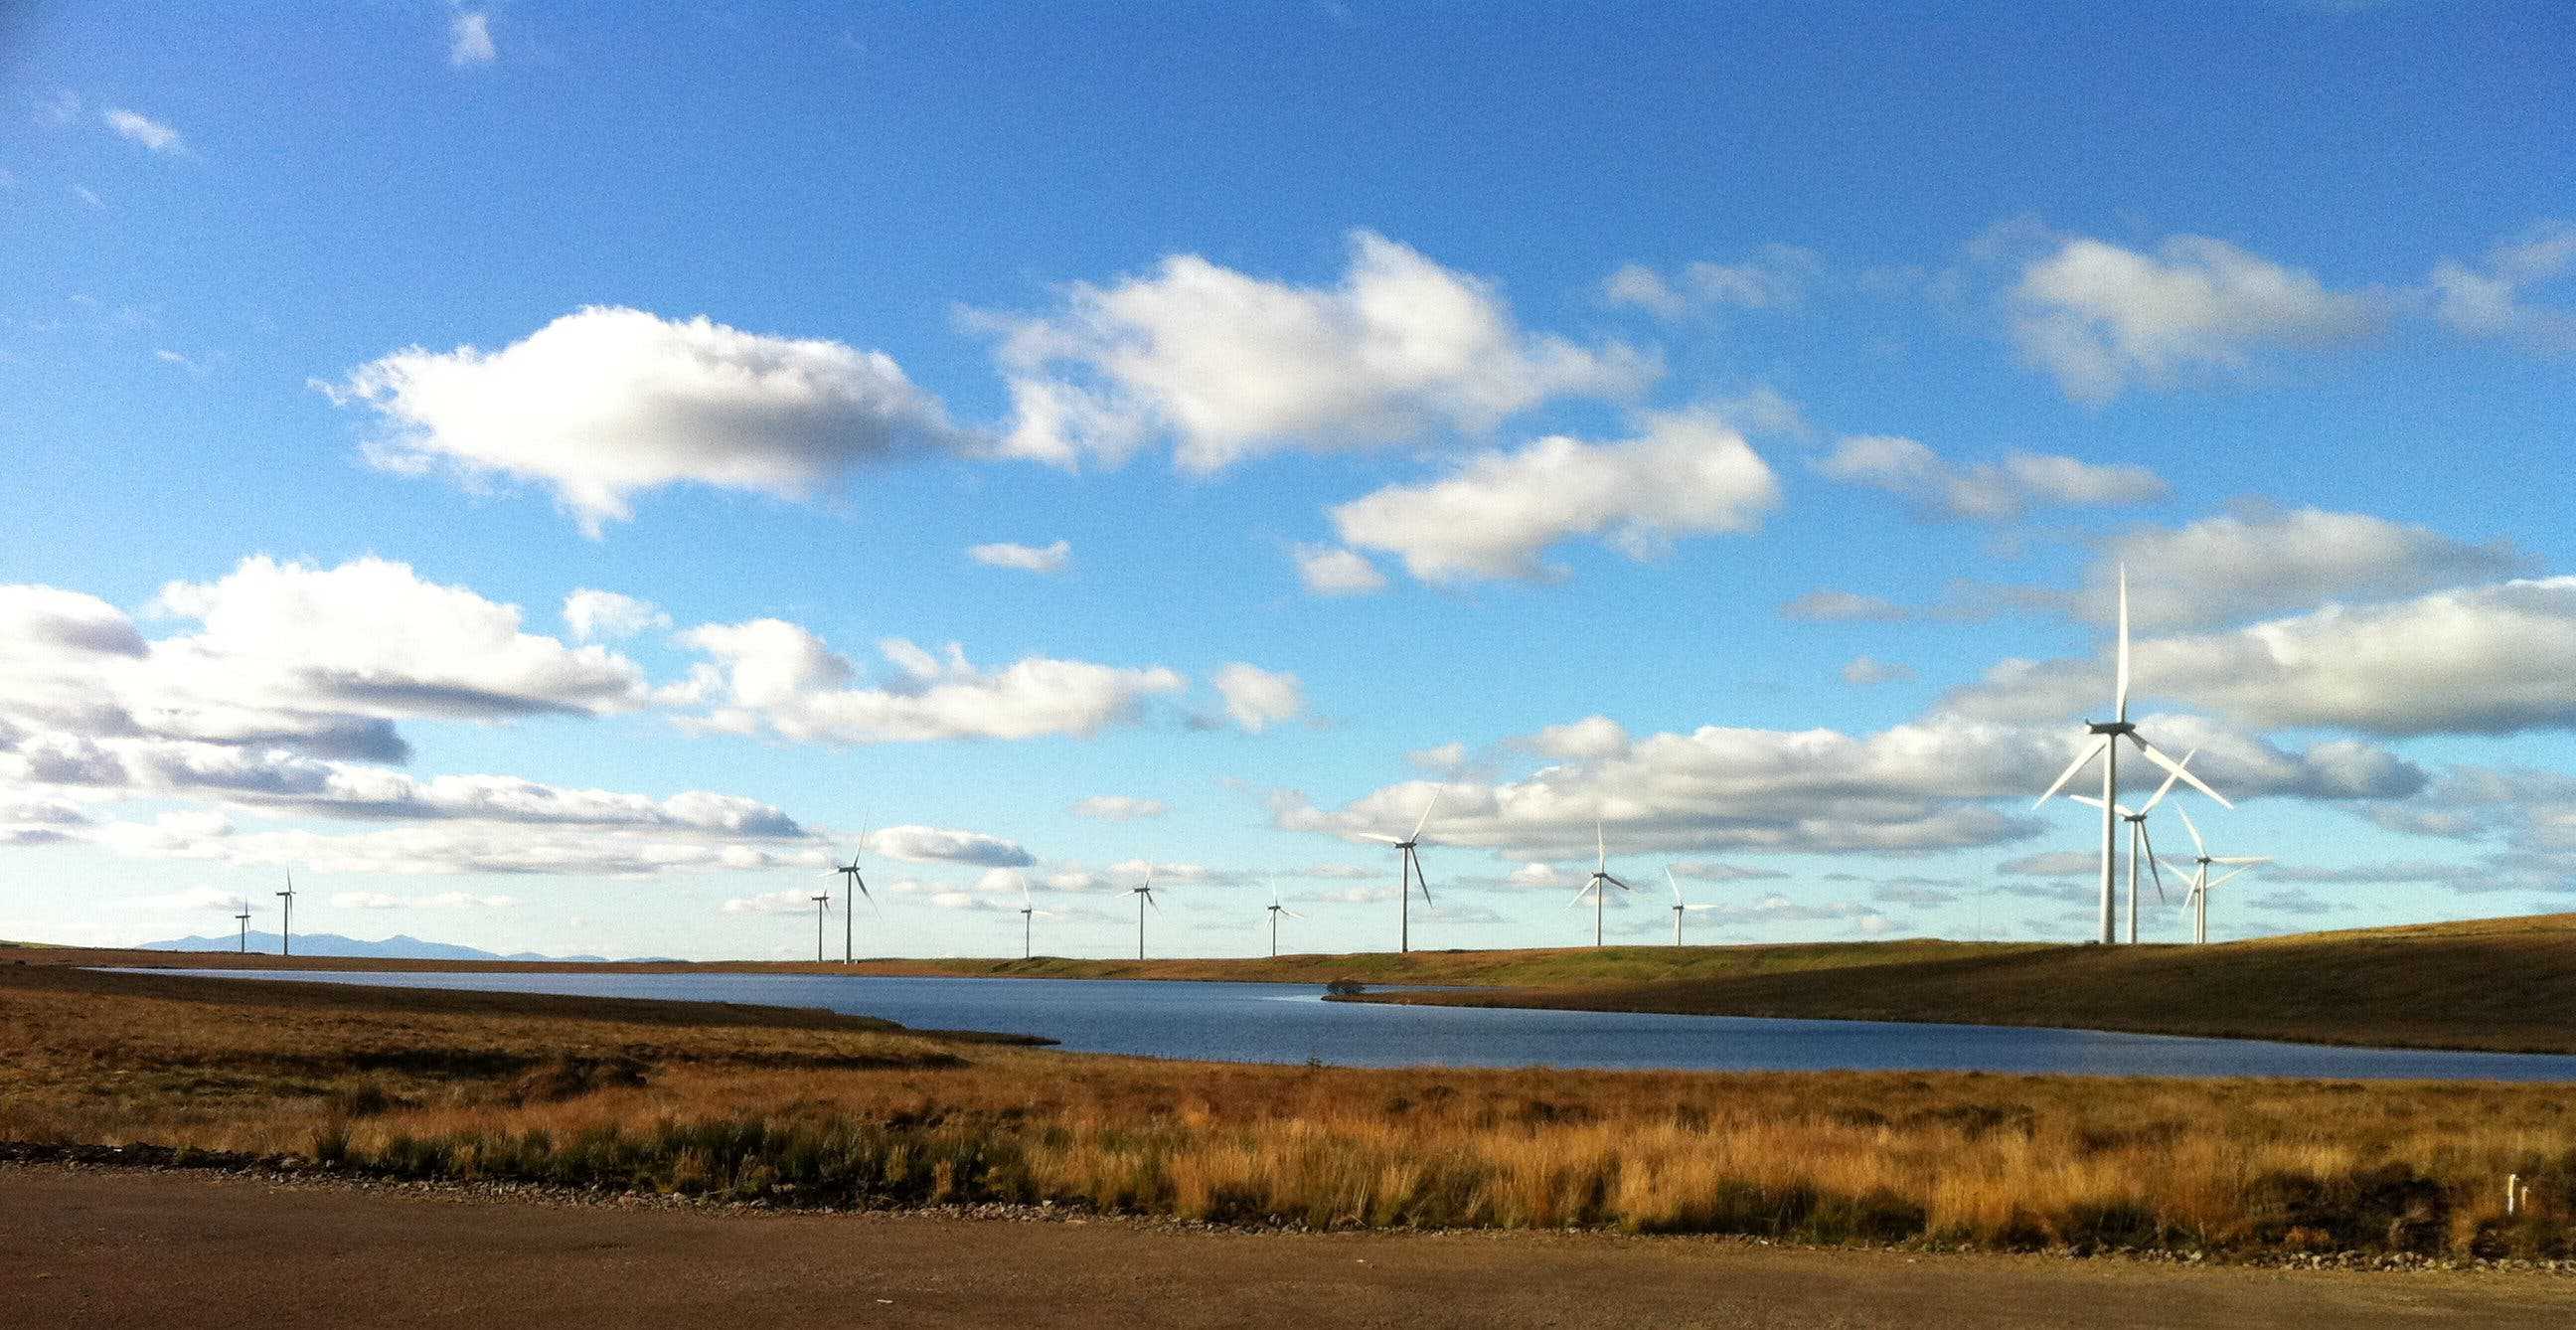 Whitelee Wind Farm with the Isle of Arran in the background. Photo by Bjmullan